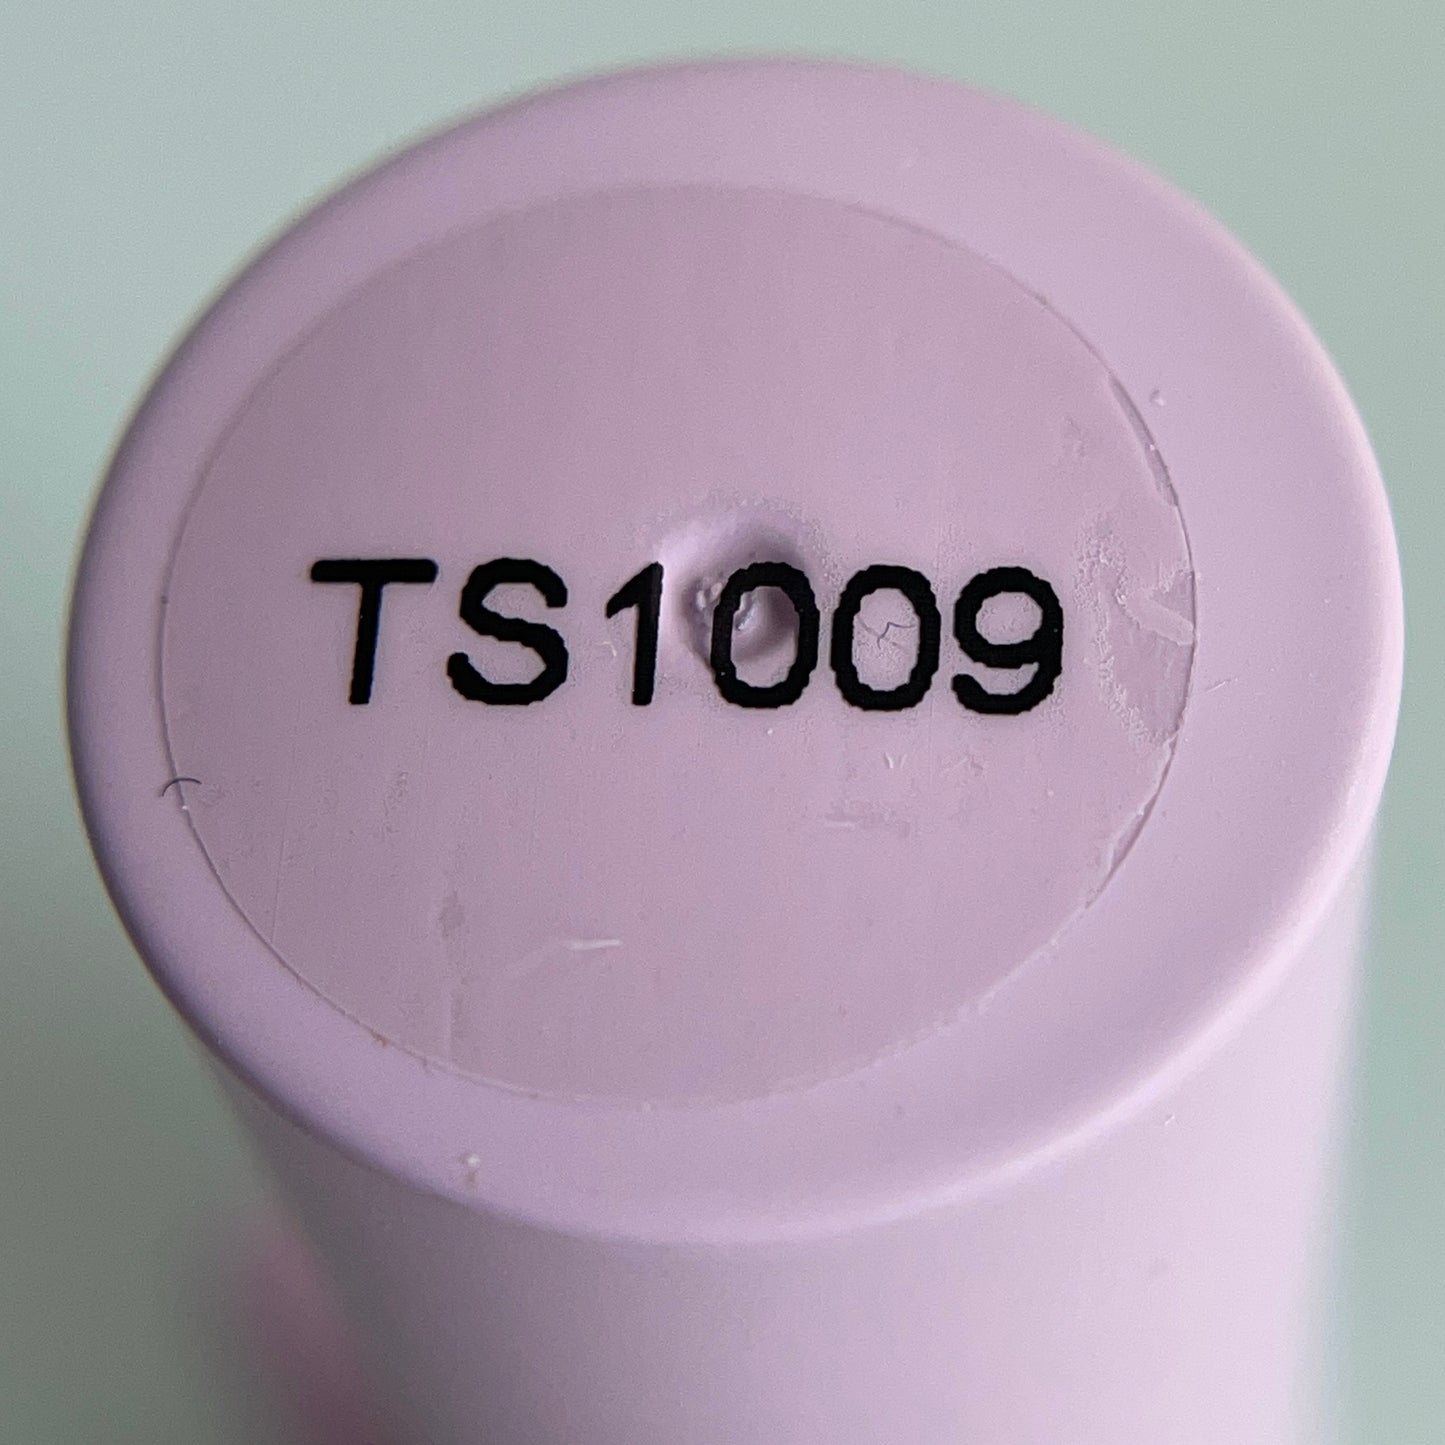 THINK OF NAIL Gel Color TS-1009 from Milk & Cream COLLECTION (8 ml)